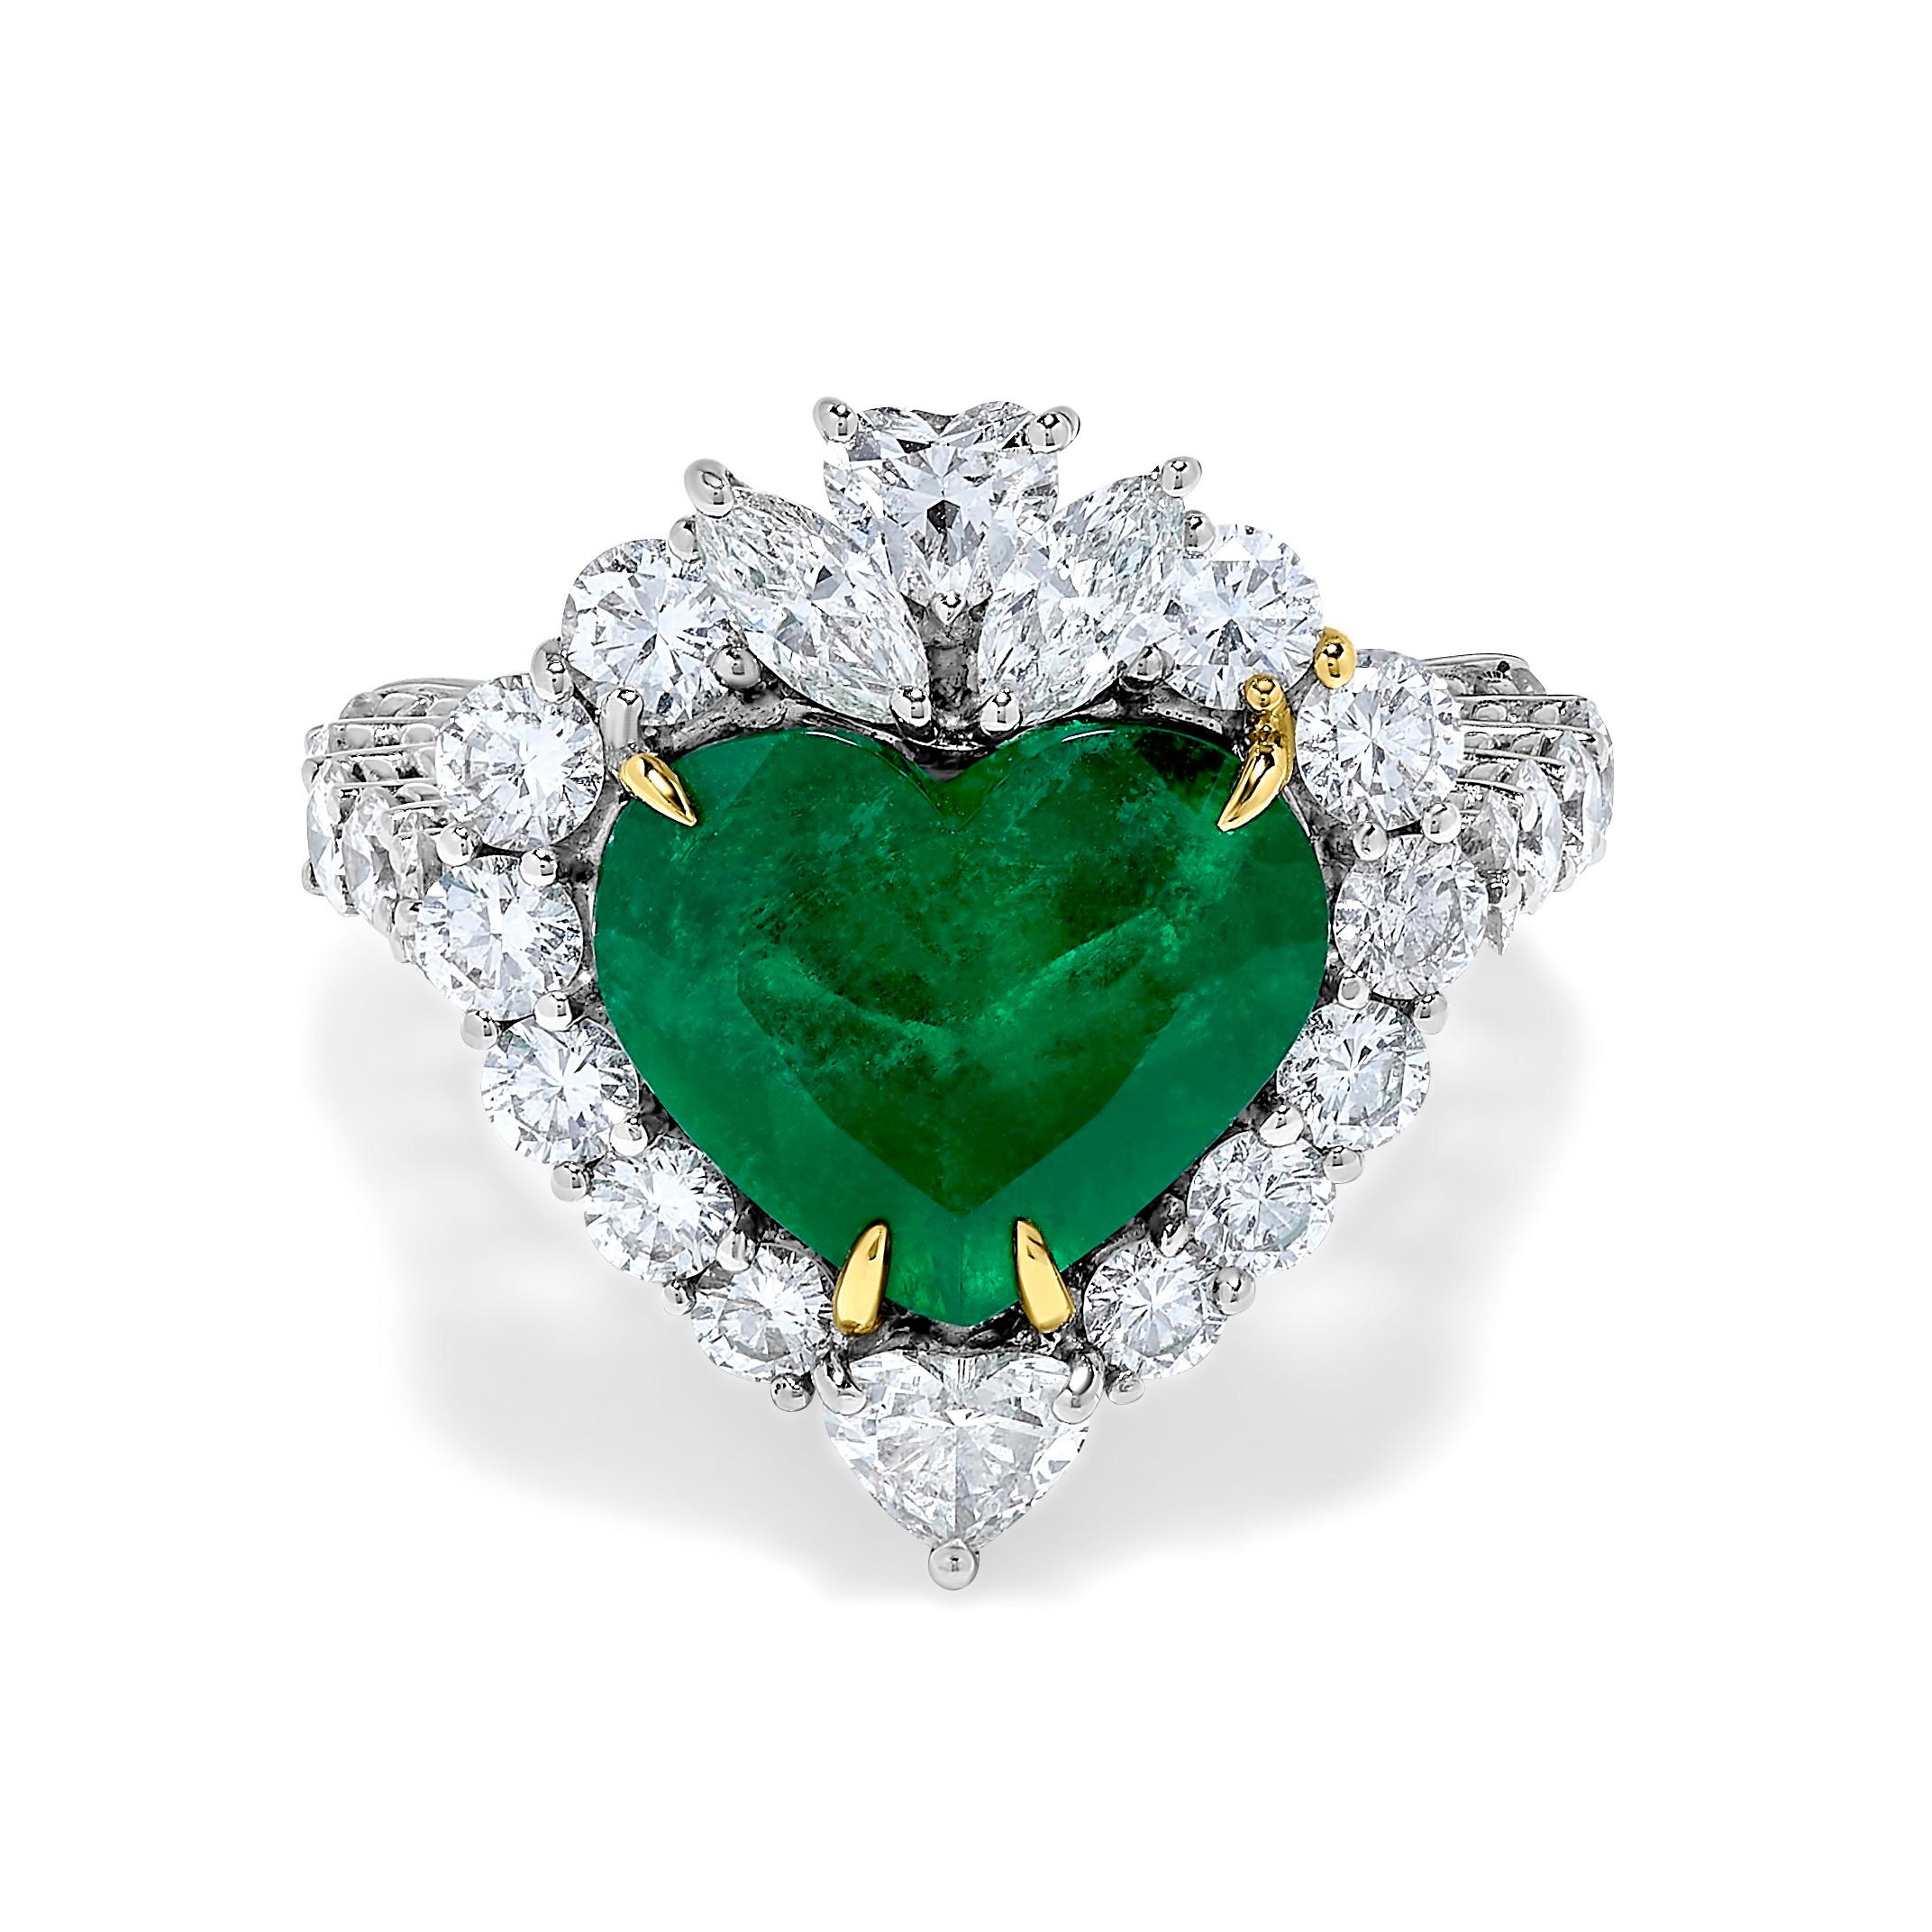 From the Emilio Jewelry Vault at dealer pricing, 
Center emerald 4.00 carats and 2.00 carats of diamonds. Please inquire for more information. 
